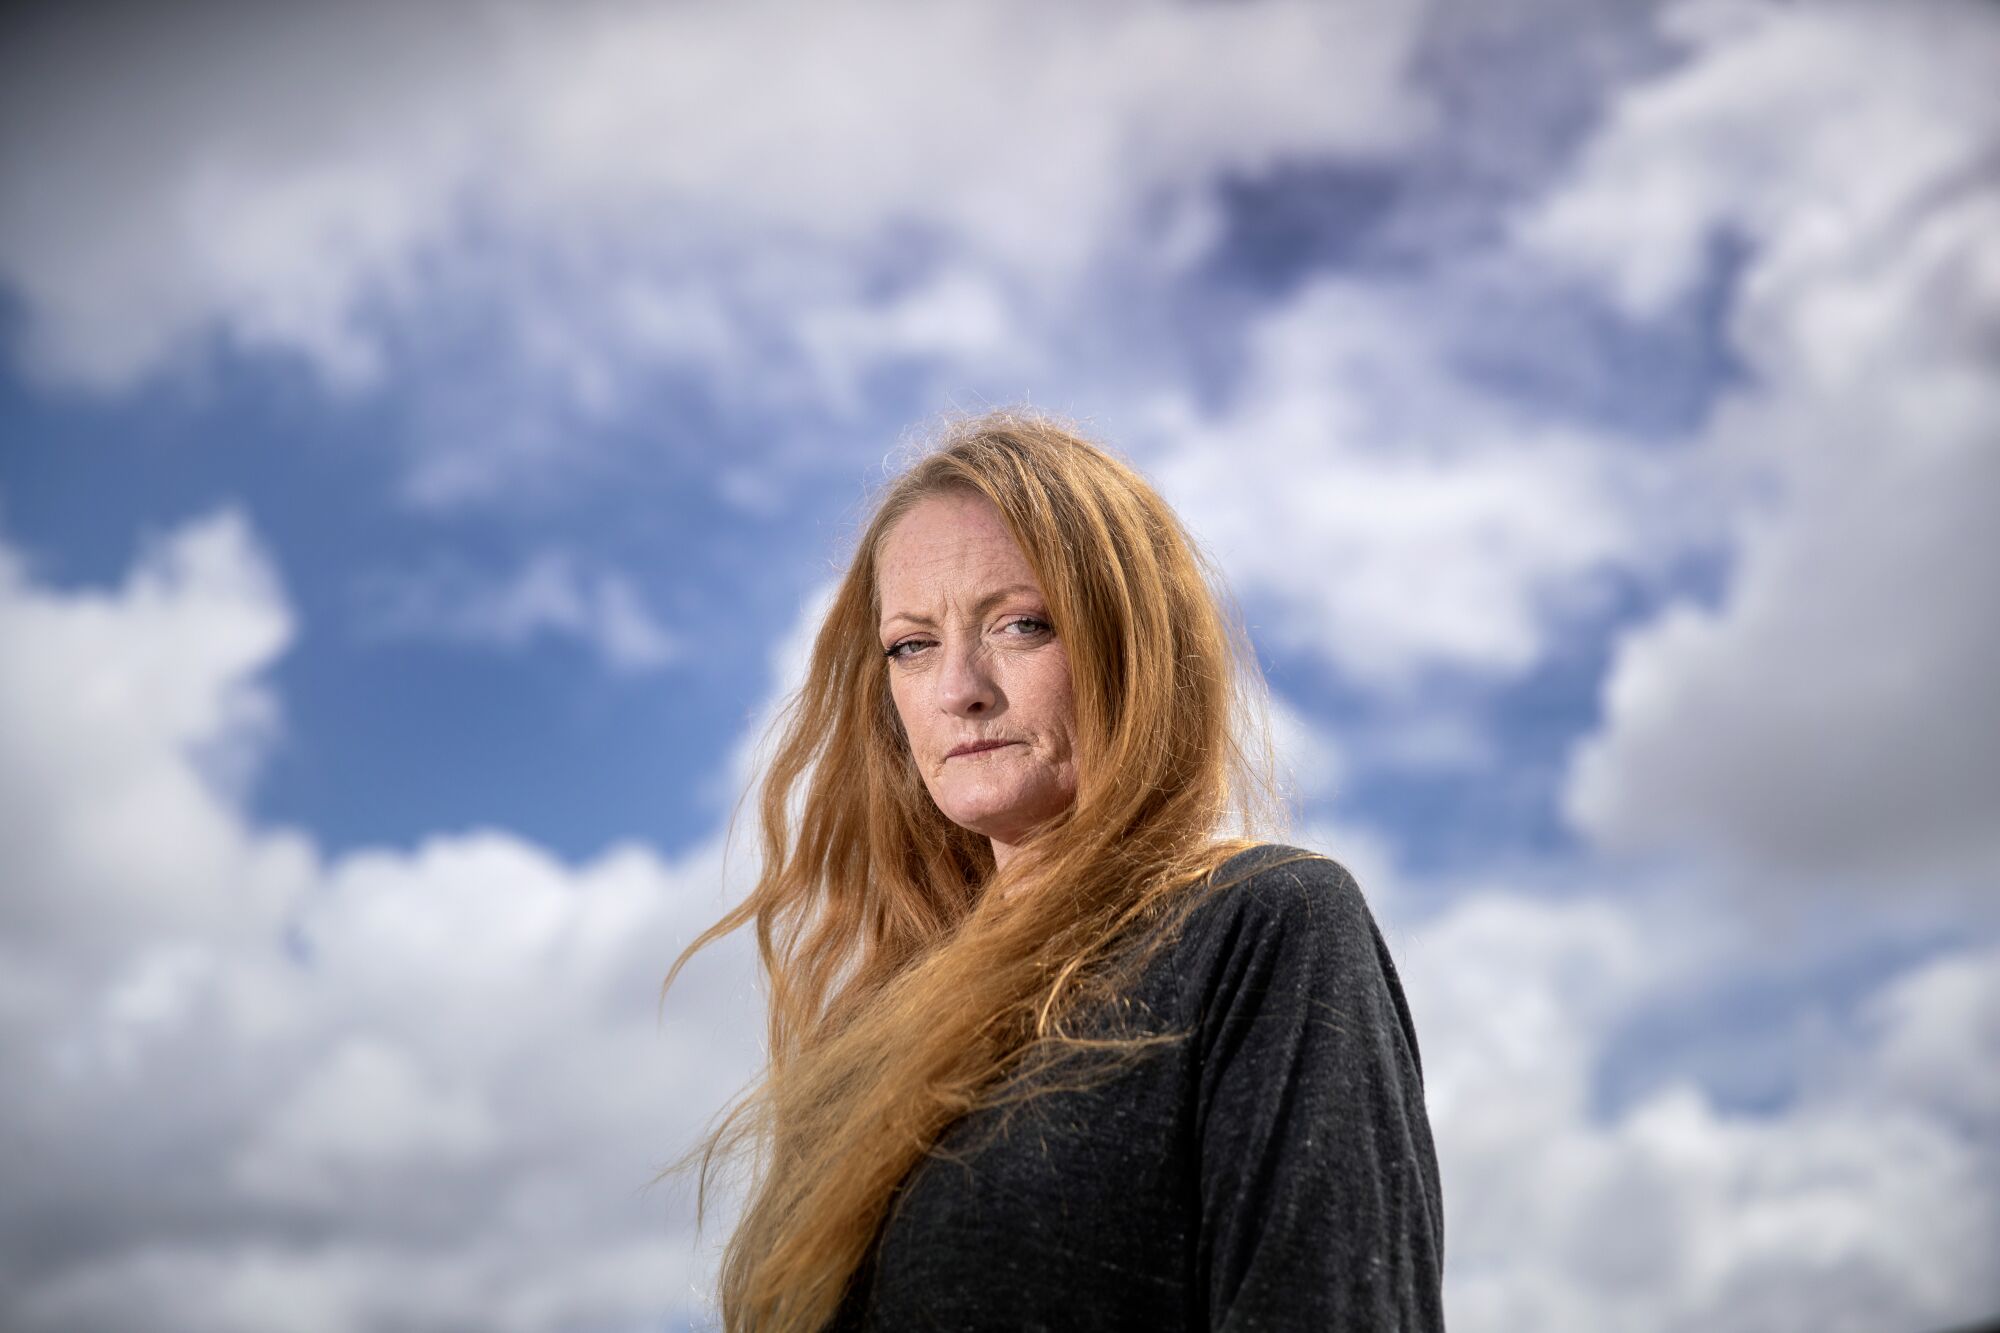 A woman with long copper-toned hair looks at the camera. Sky with fluffy white clouds fills the background.